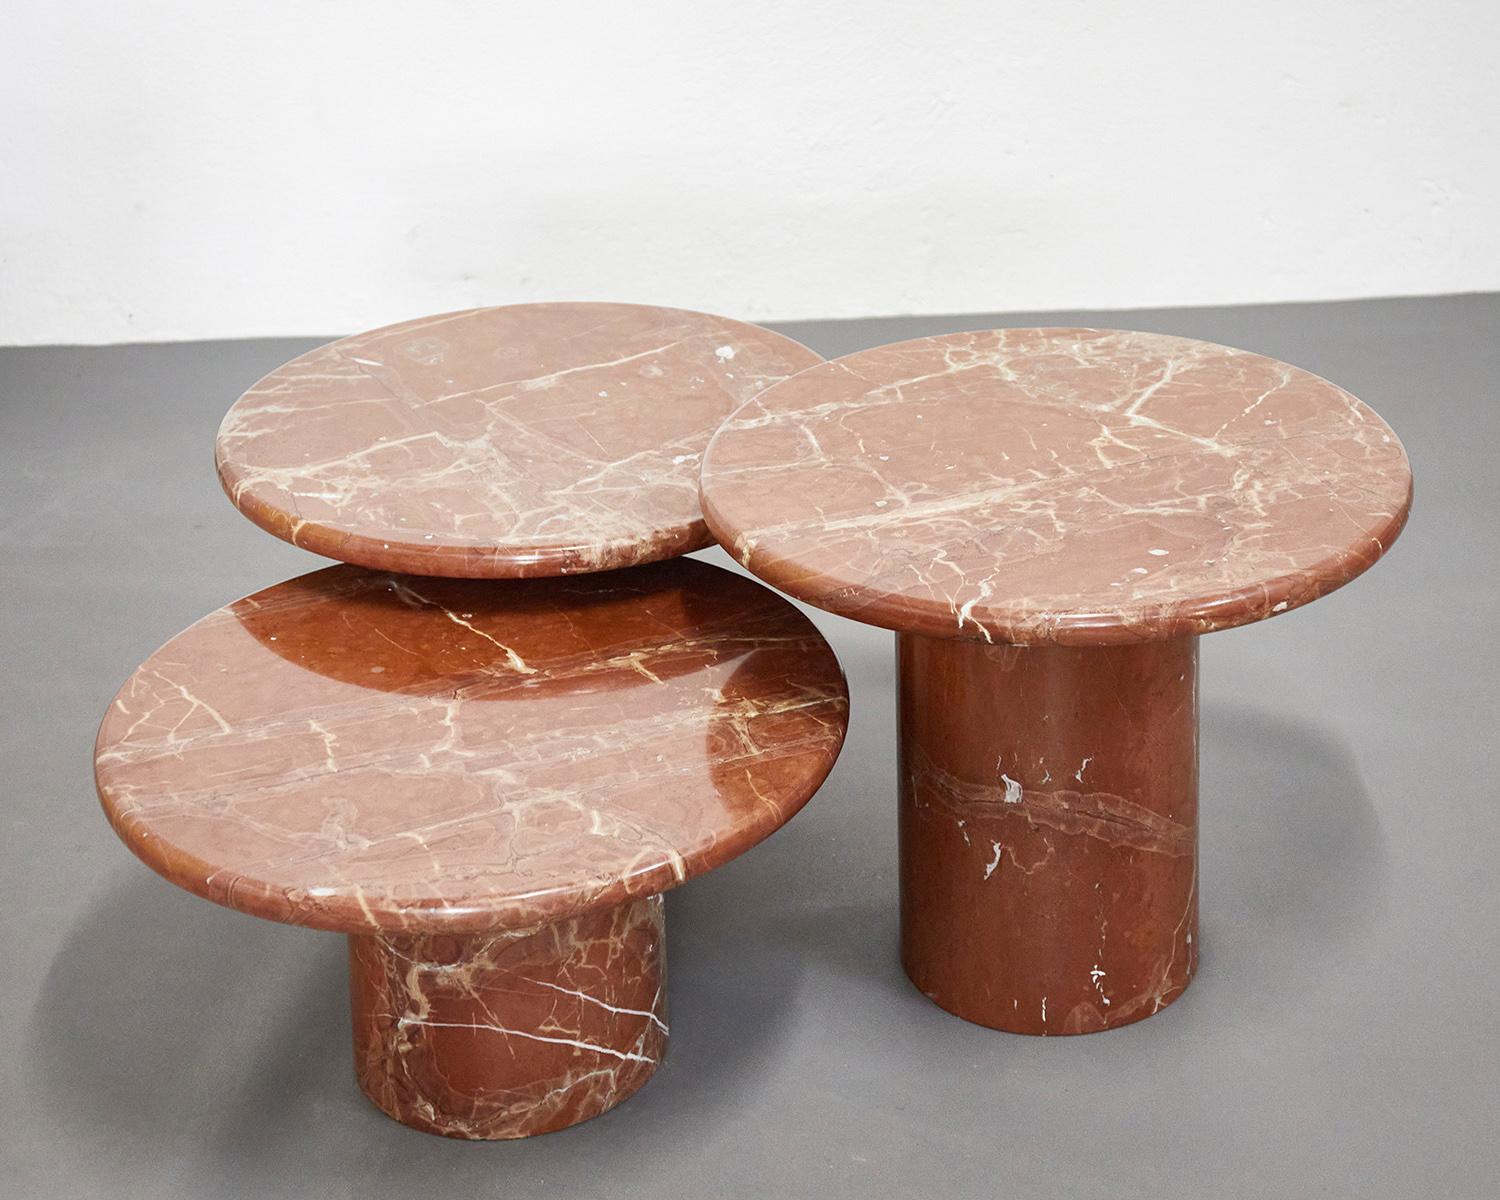 Set of three red Verona marble tables manufactured in Italy around 1980.

This rare set of coffee or side tables is entirely made of massive red Verona marble. Both the top as well as the conical shaped bases are massive which is extremely